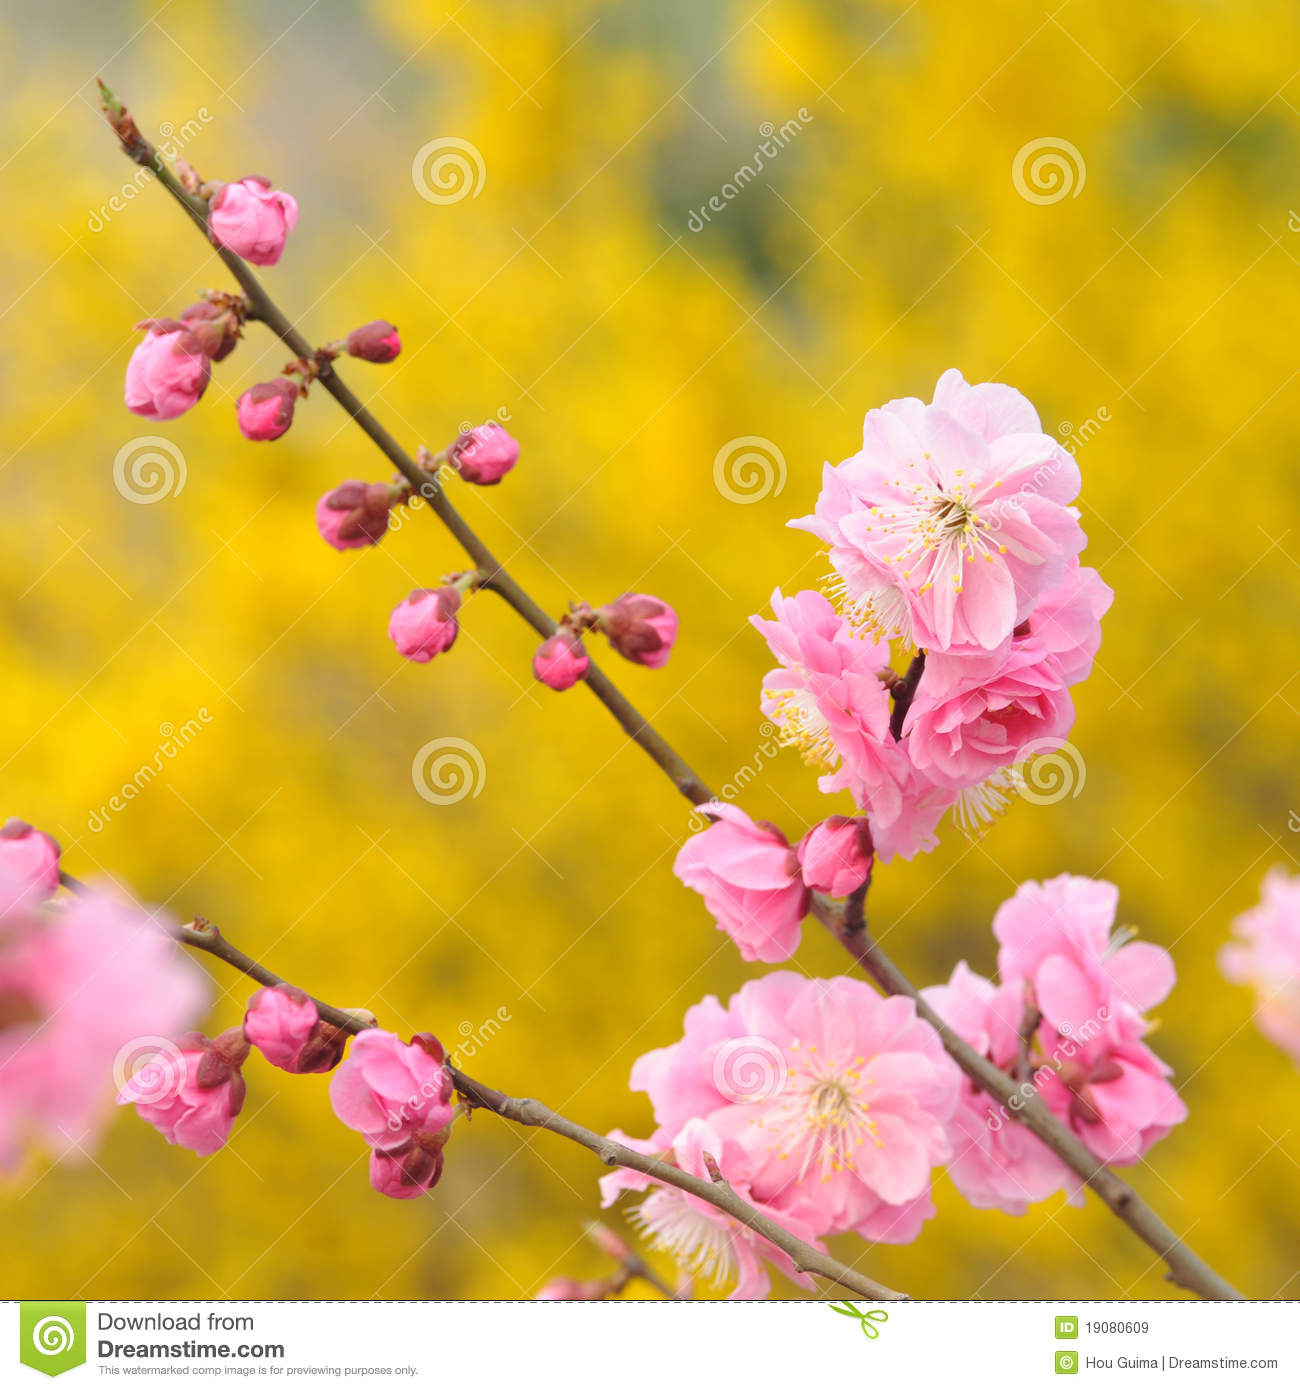 Peach Blossom Royalty Free Stock Images   Image  19080609